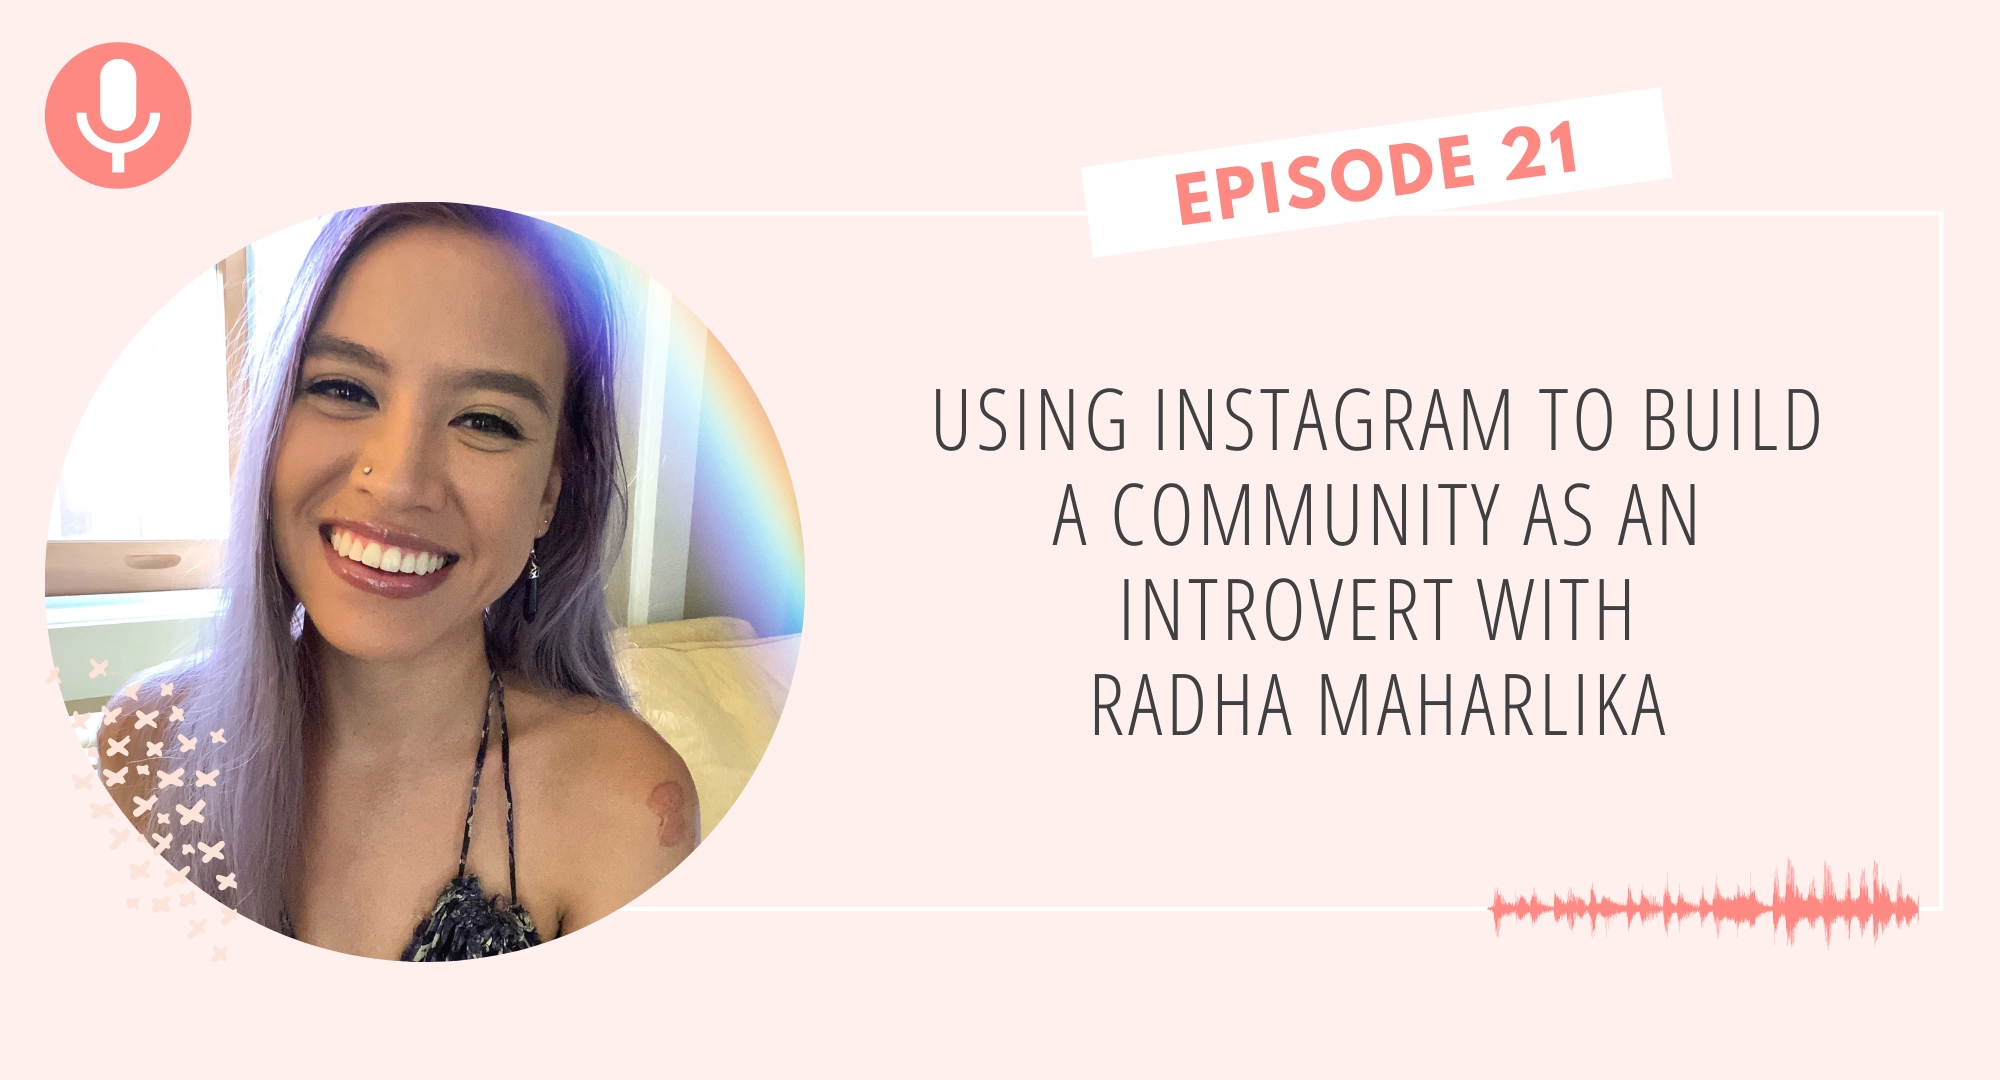 Using Instagram to Build a Community as an Introvert with Radha Maharlika